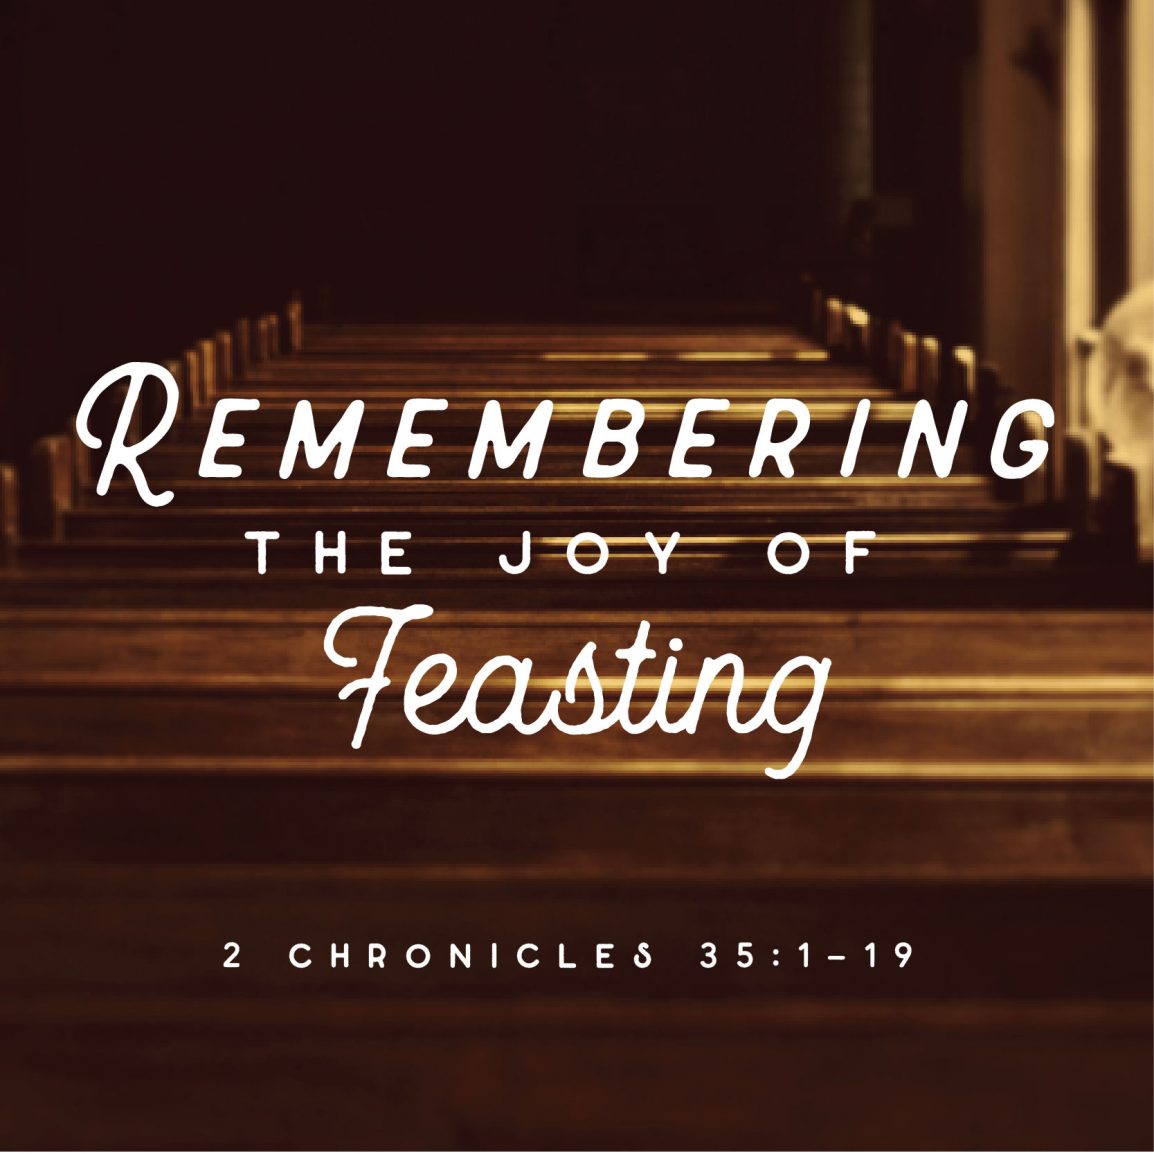 Remembering the joy of feasting: 2 Chronicles 35:1-19